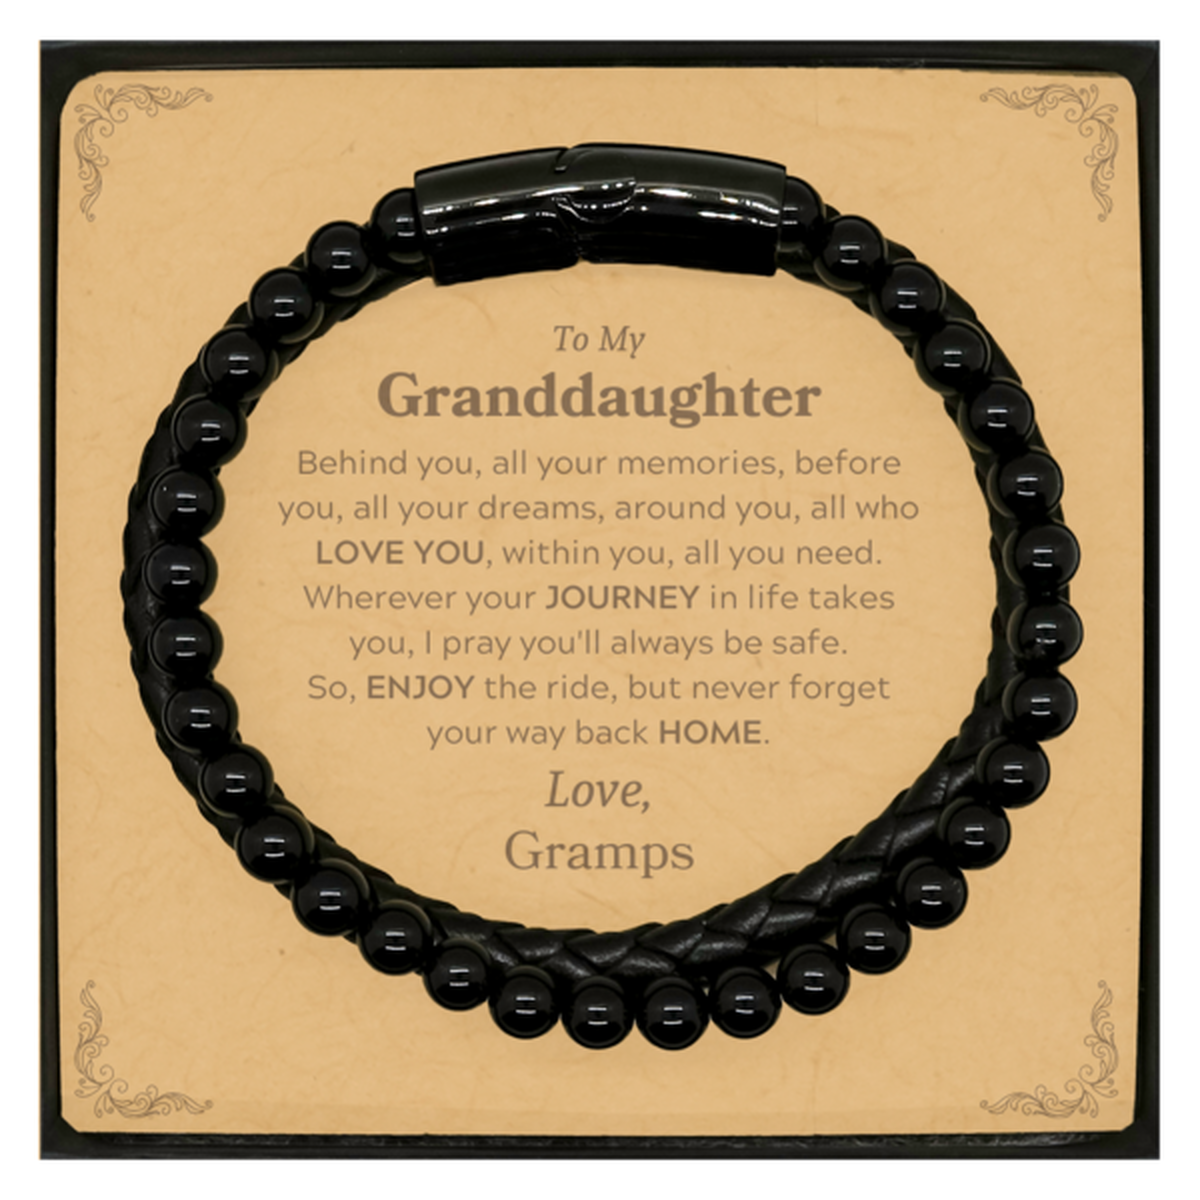 To My Granddaughter Graduation Gifts from Gramps, Granddaughter Stone Leather Bracelets Christmas Birthday Gifts for Granddaughter Behind you, all your memories, before you, all your dreams. Love, Gramps